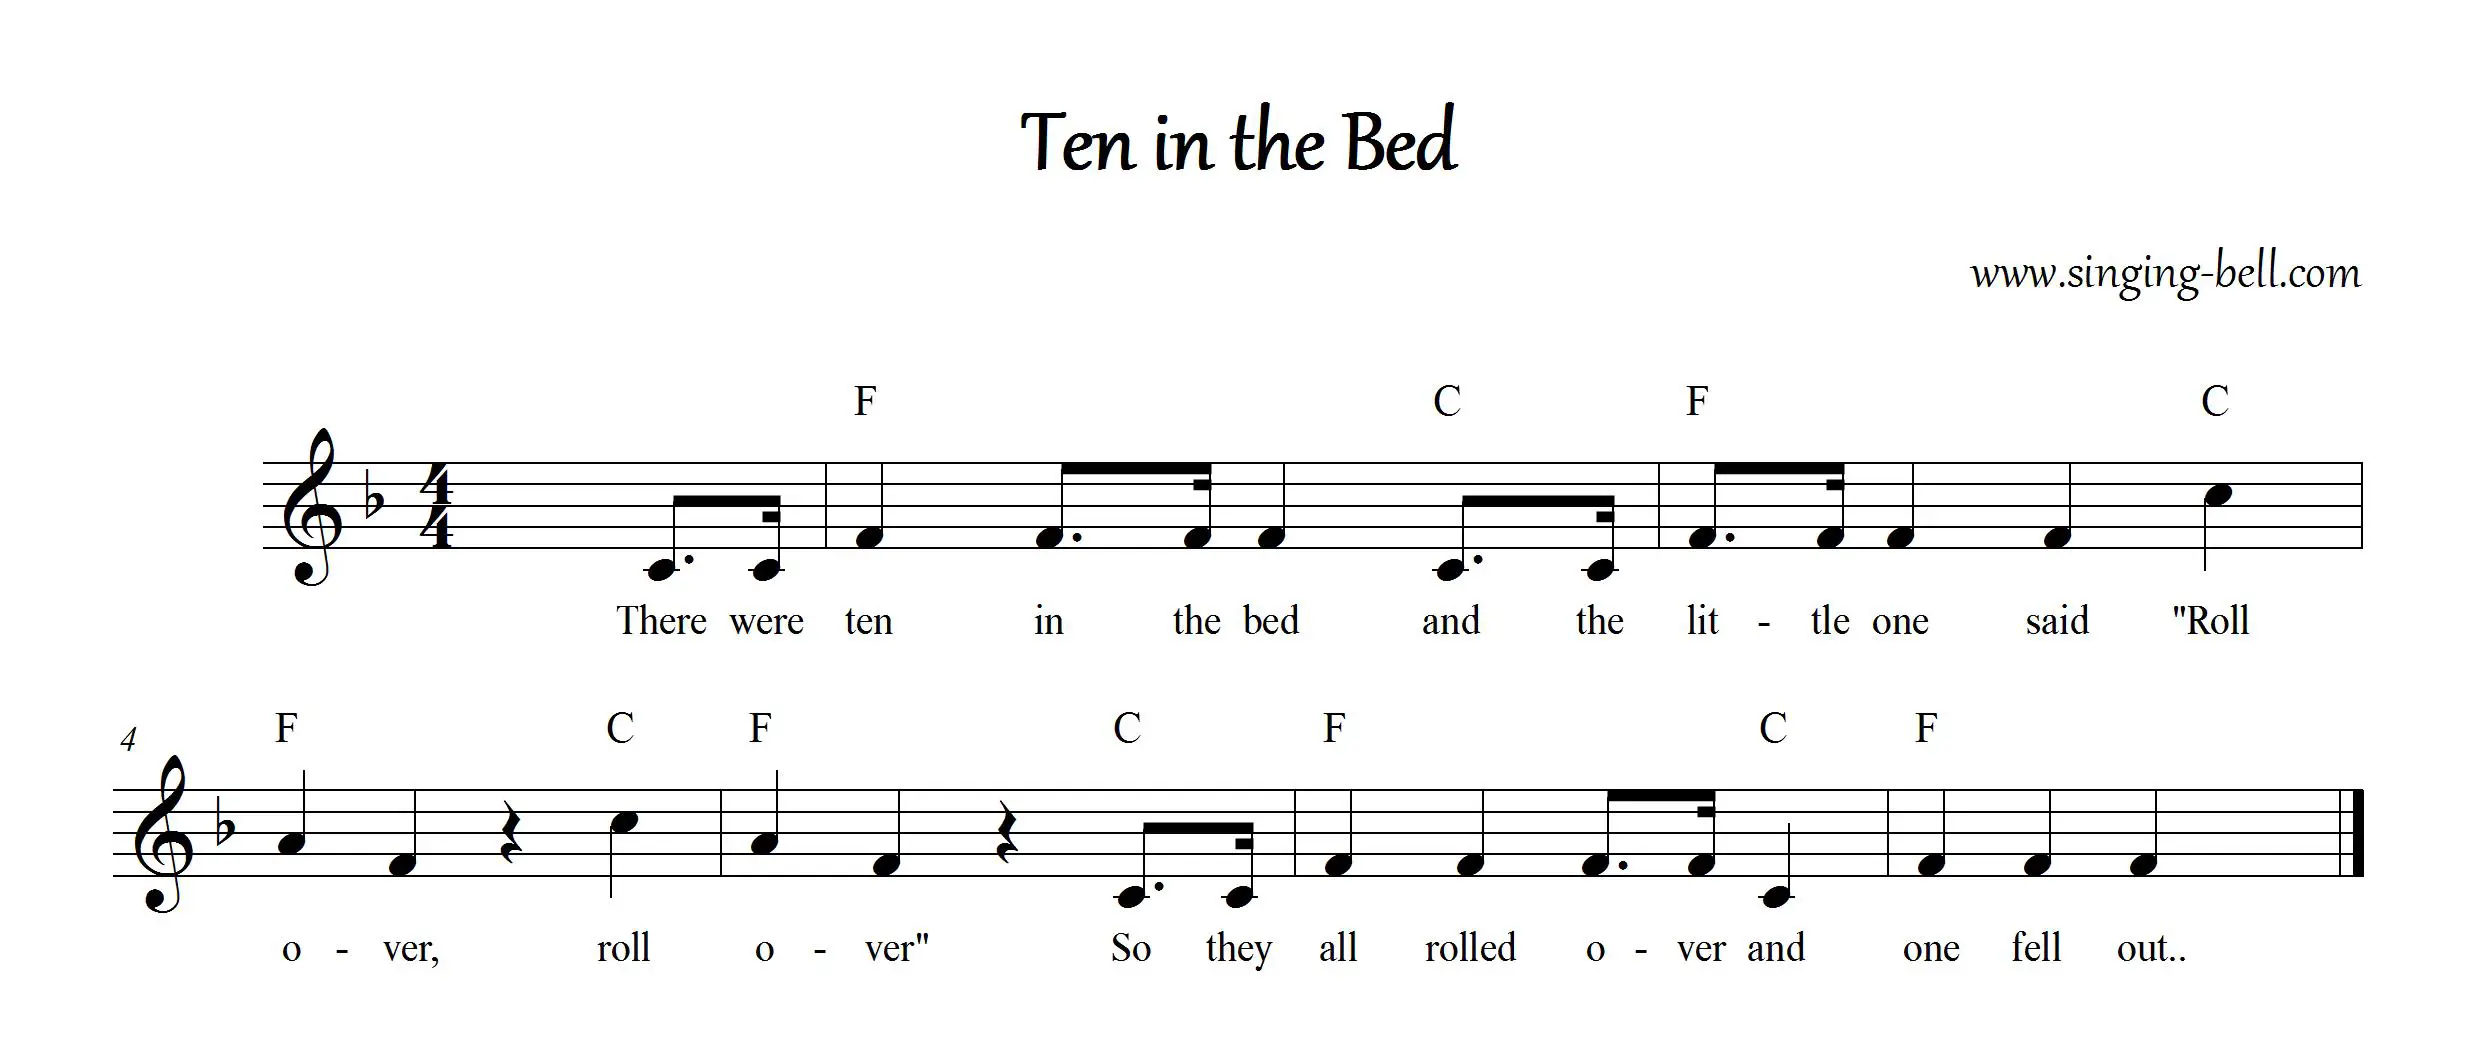 Ten in the Bed | Free Music Score